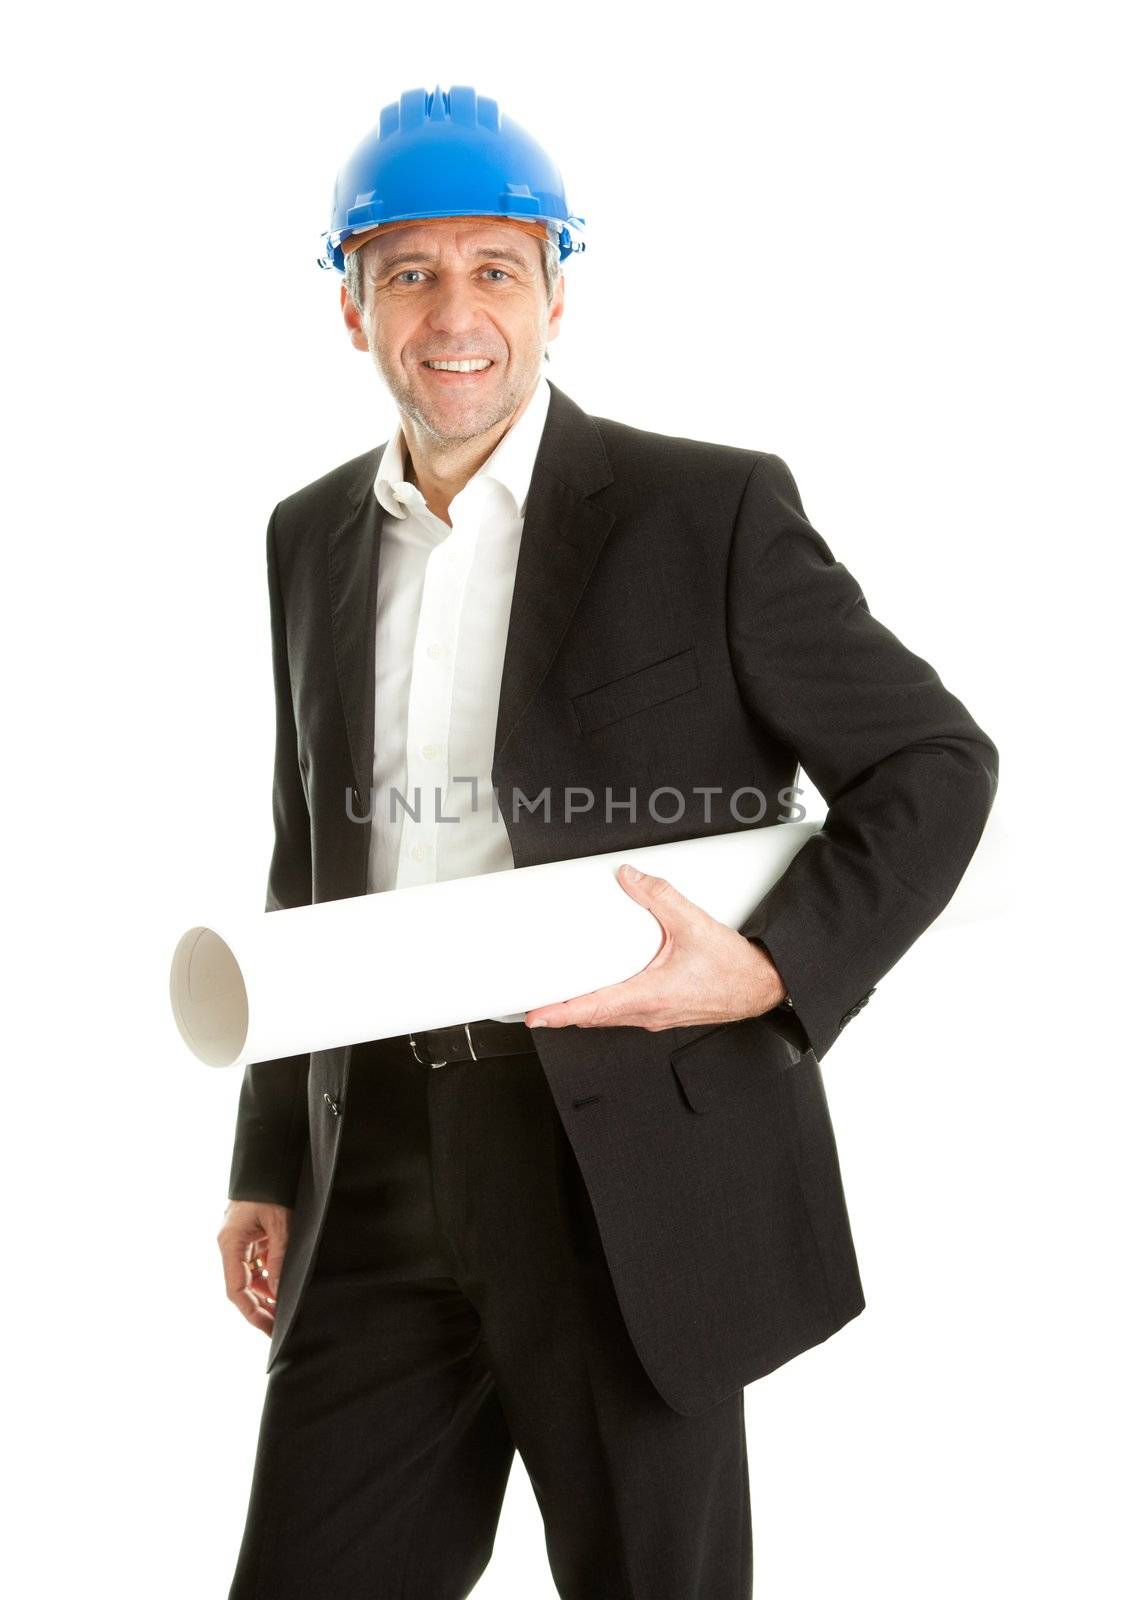 Portrait of successfull architect wearing blue hard hat and holding blueprints. Isolated on white